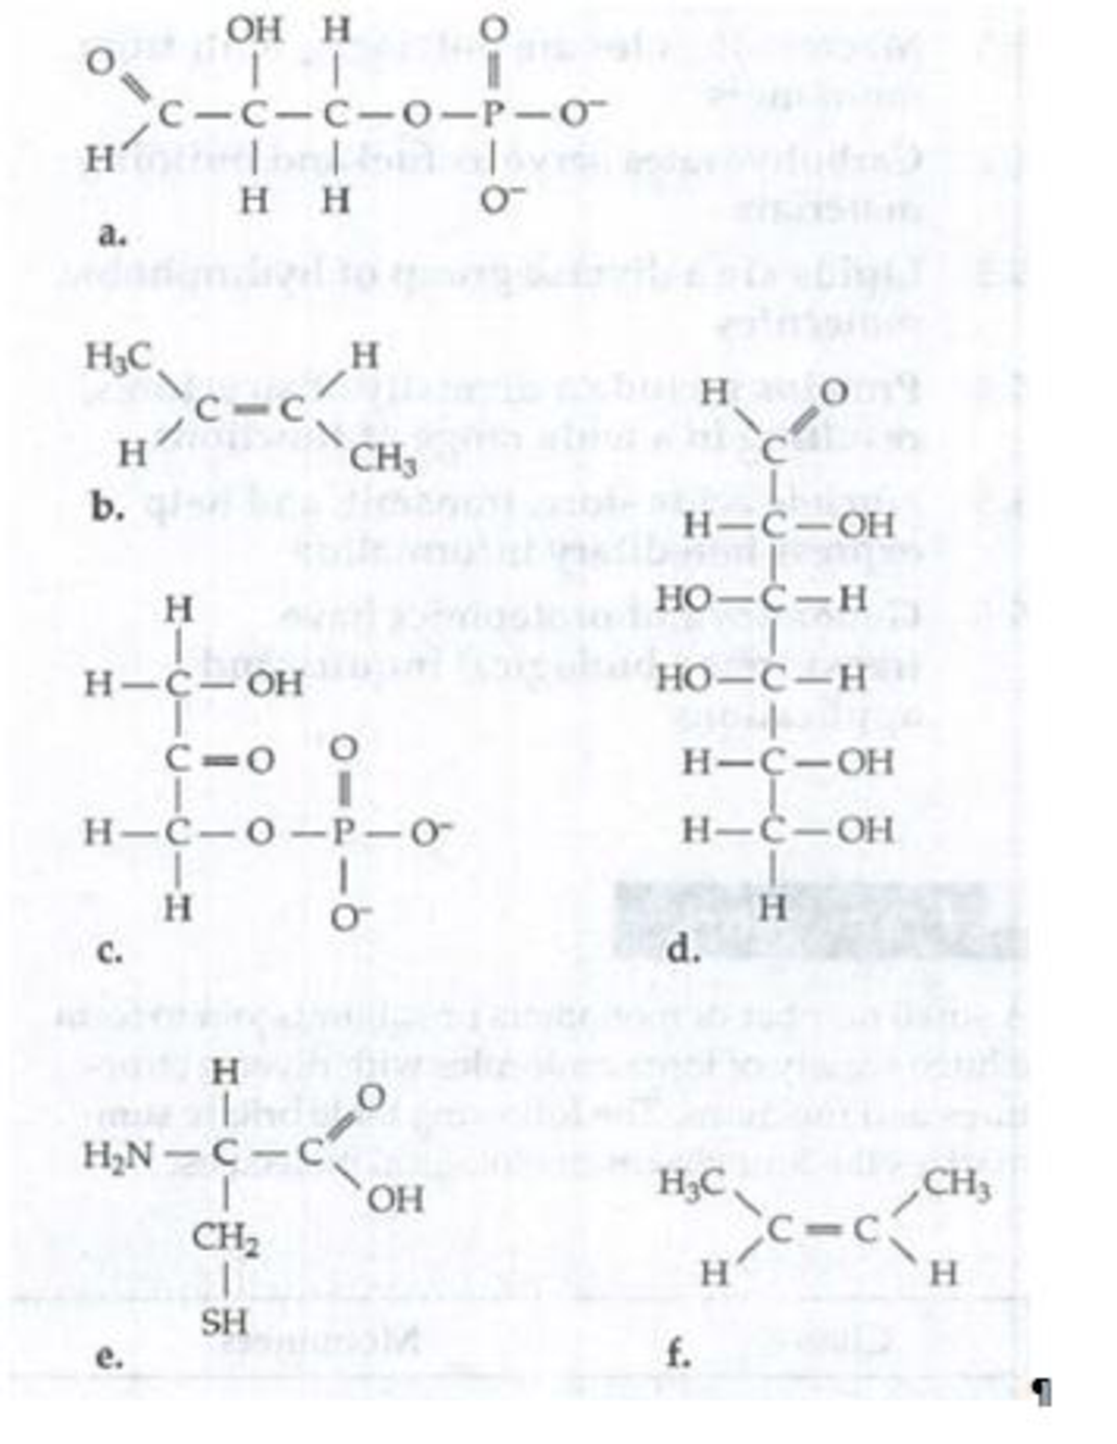 Chapter 4, Problem 10TYKM, aldehyde 